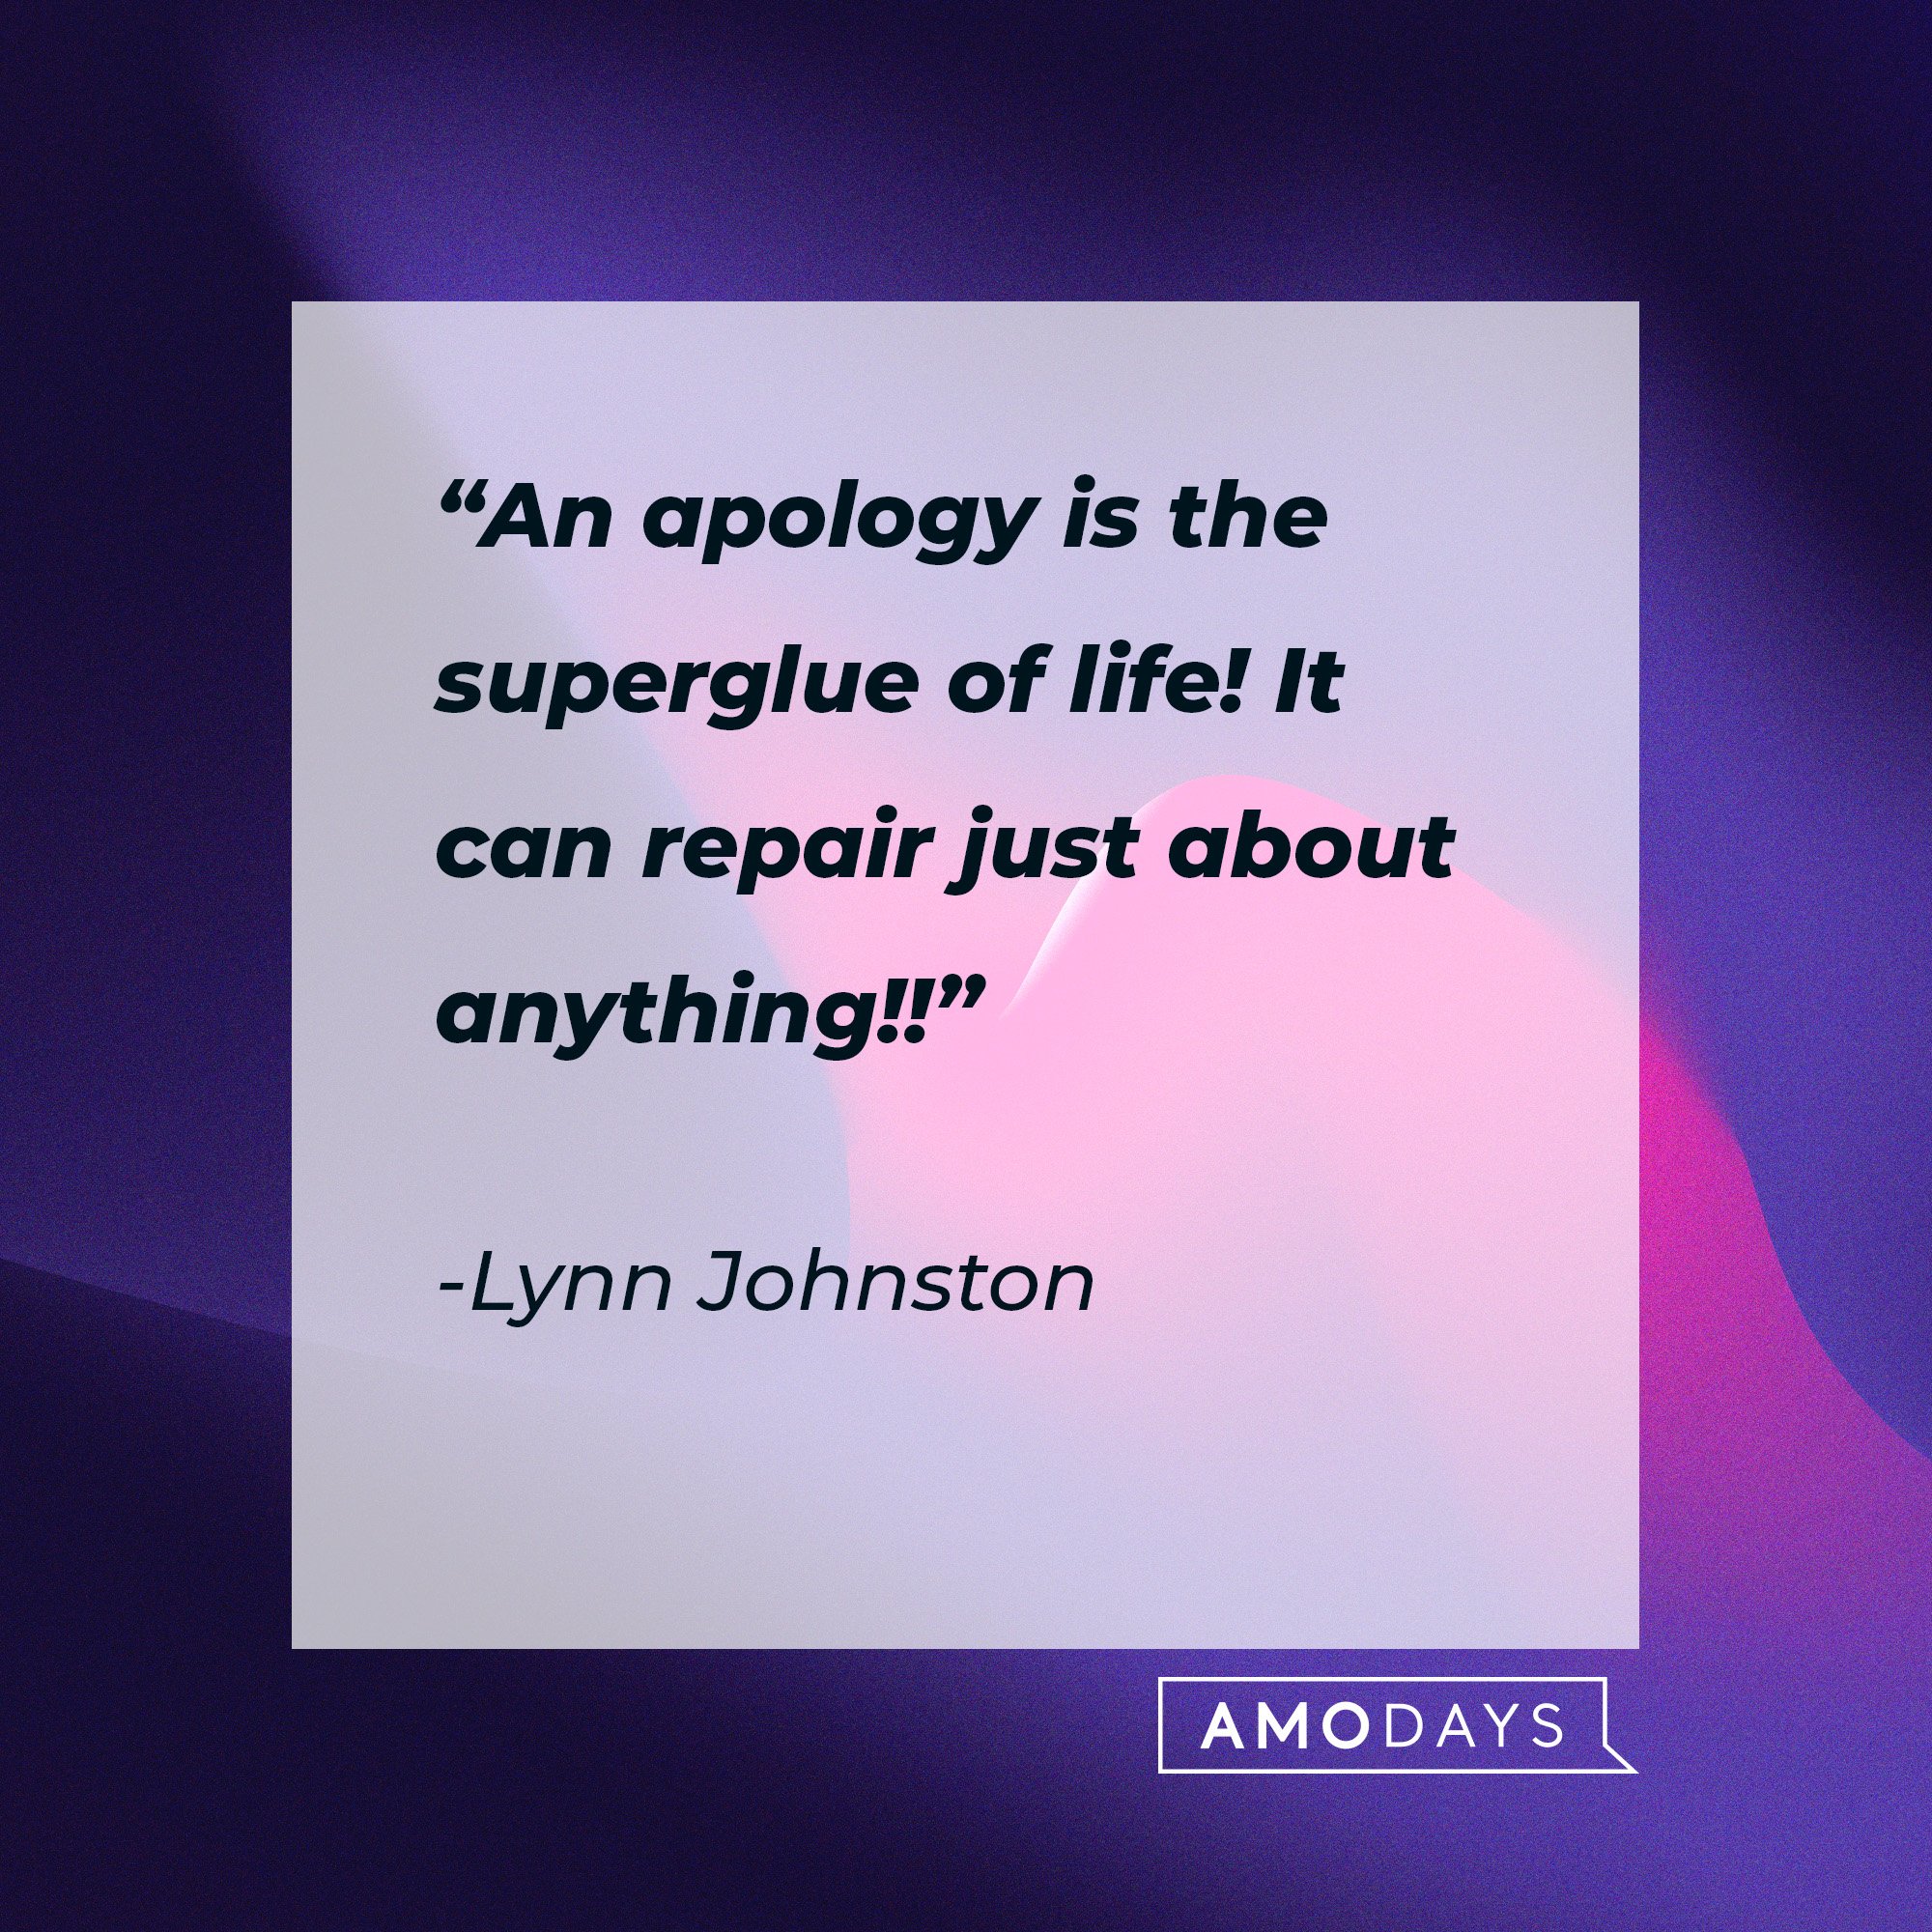  Lynn Johnston's quote: “An apology is the superglue of life! It can repair just about anything!!” | Image: AmolDays